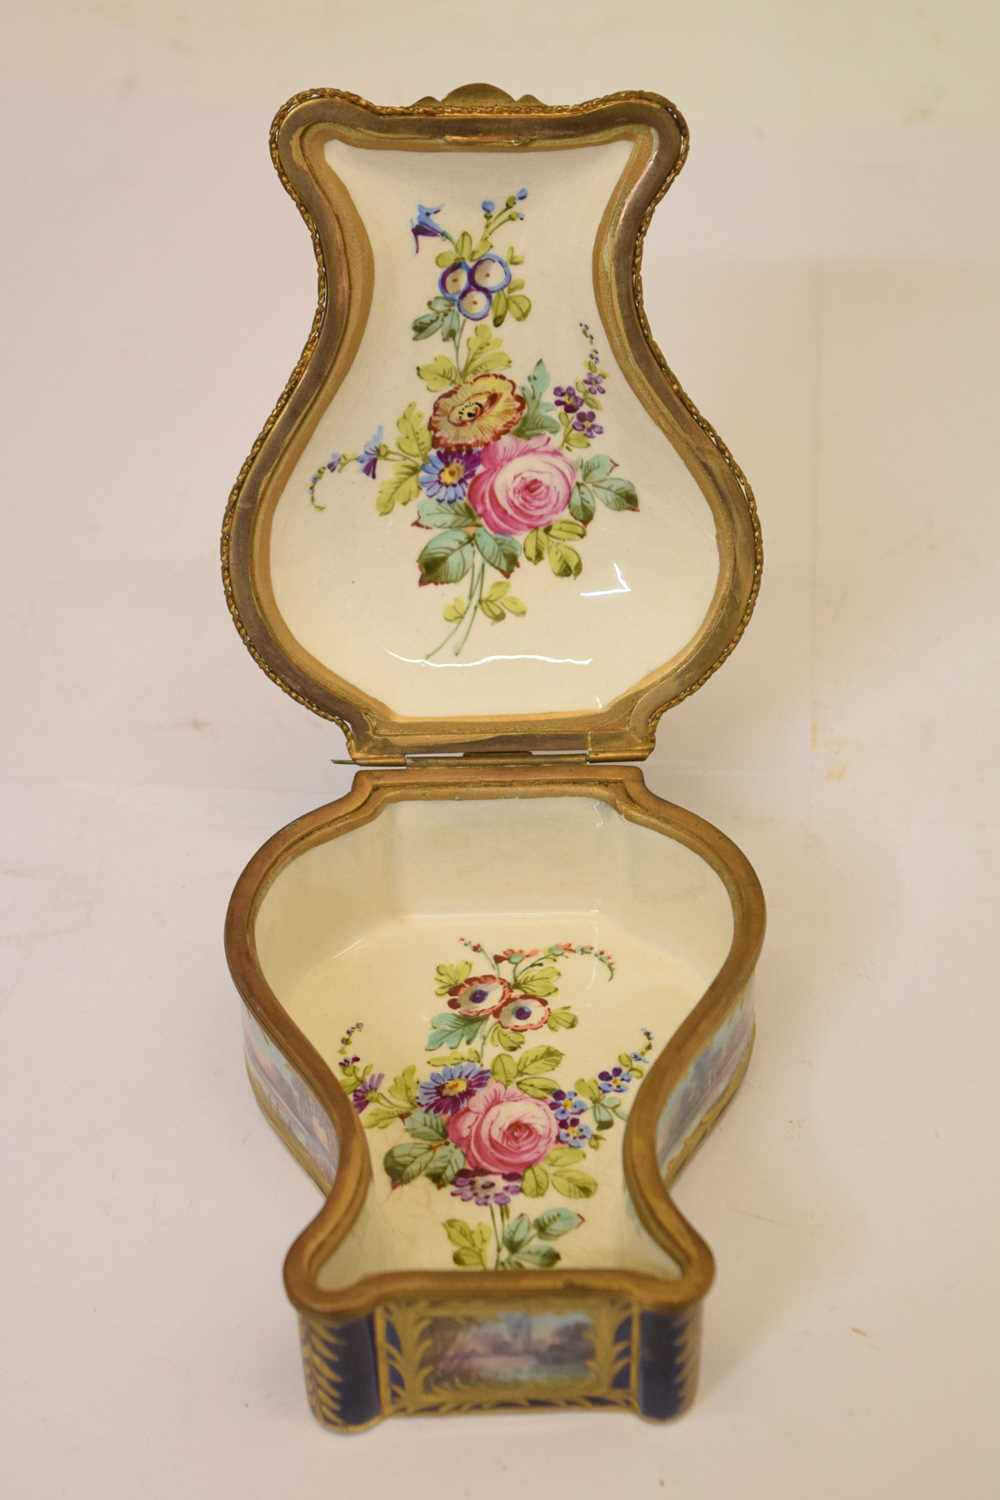 18th century-style porcelain and gilt metal box - Image 8 of 8